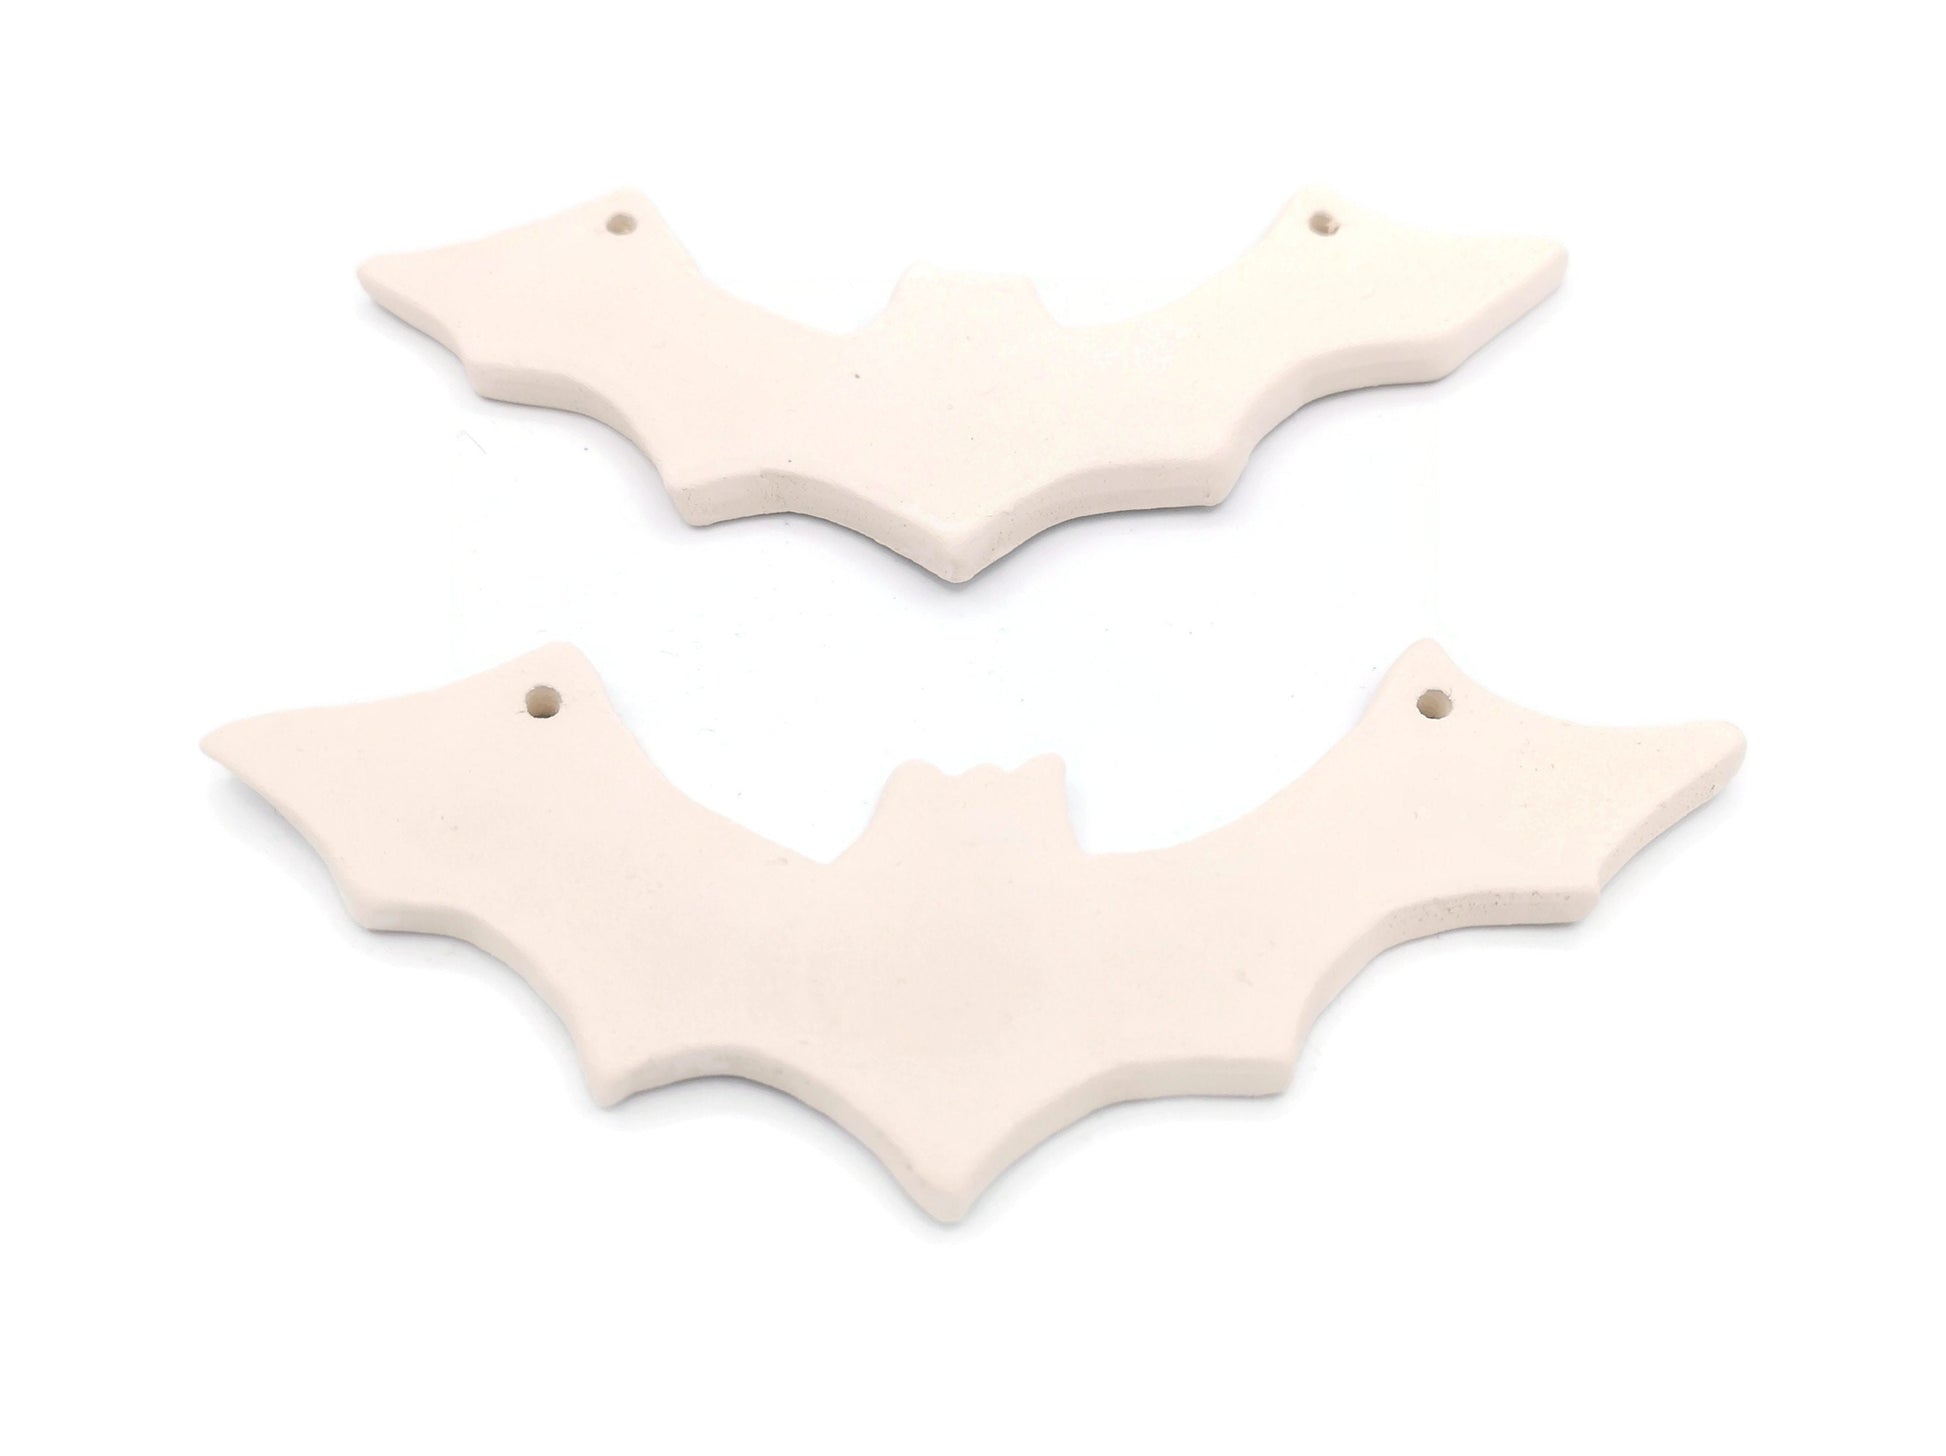 Bat Decor Wall Hanging, set of 2 Clay Ornaments Blank, Halloween Handmade Ceramic Bisque Ready To Paint, Best Sellers Diy Craft Kit - Ceramica Ana Rafael